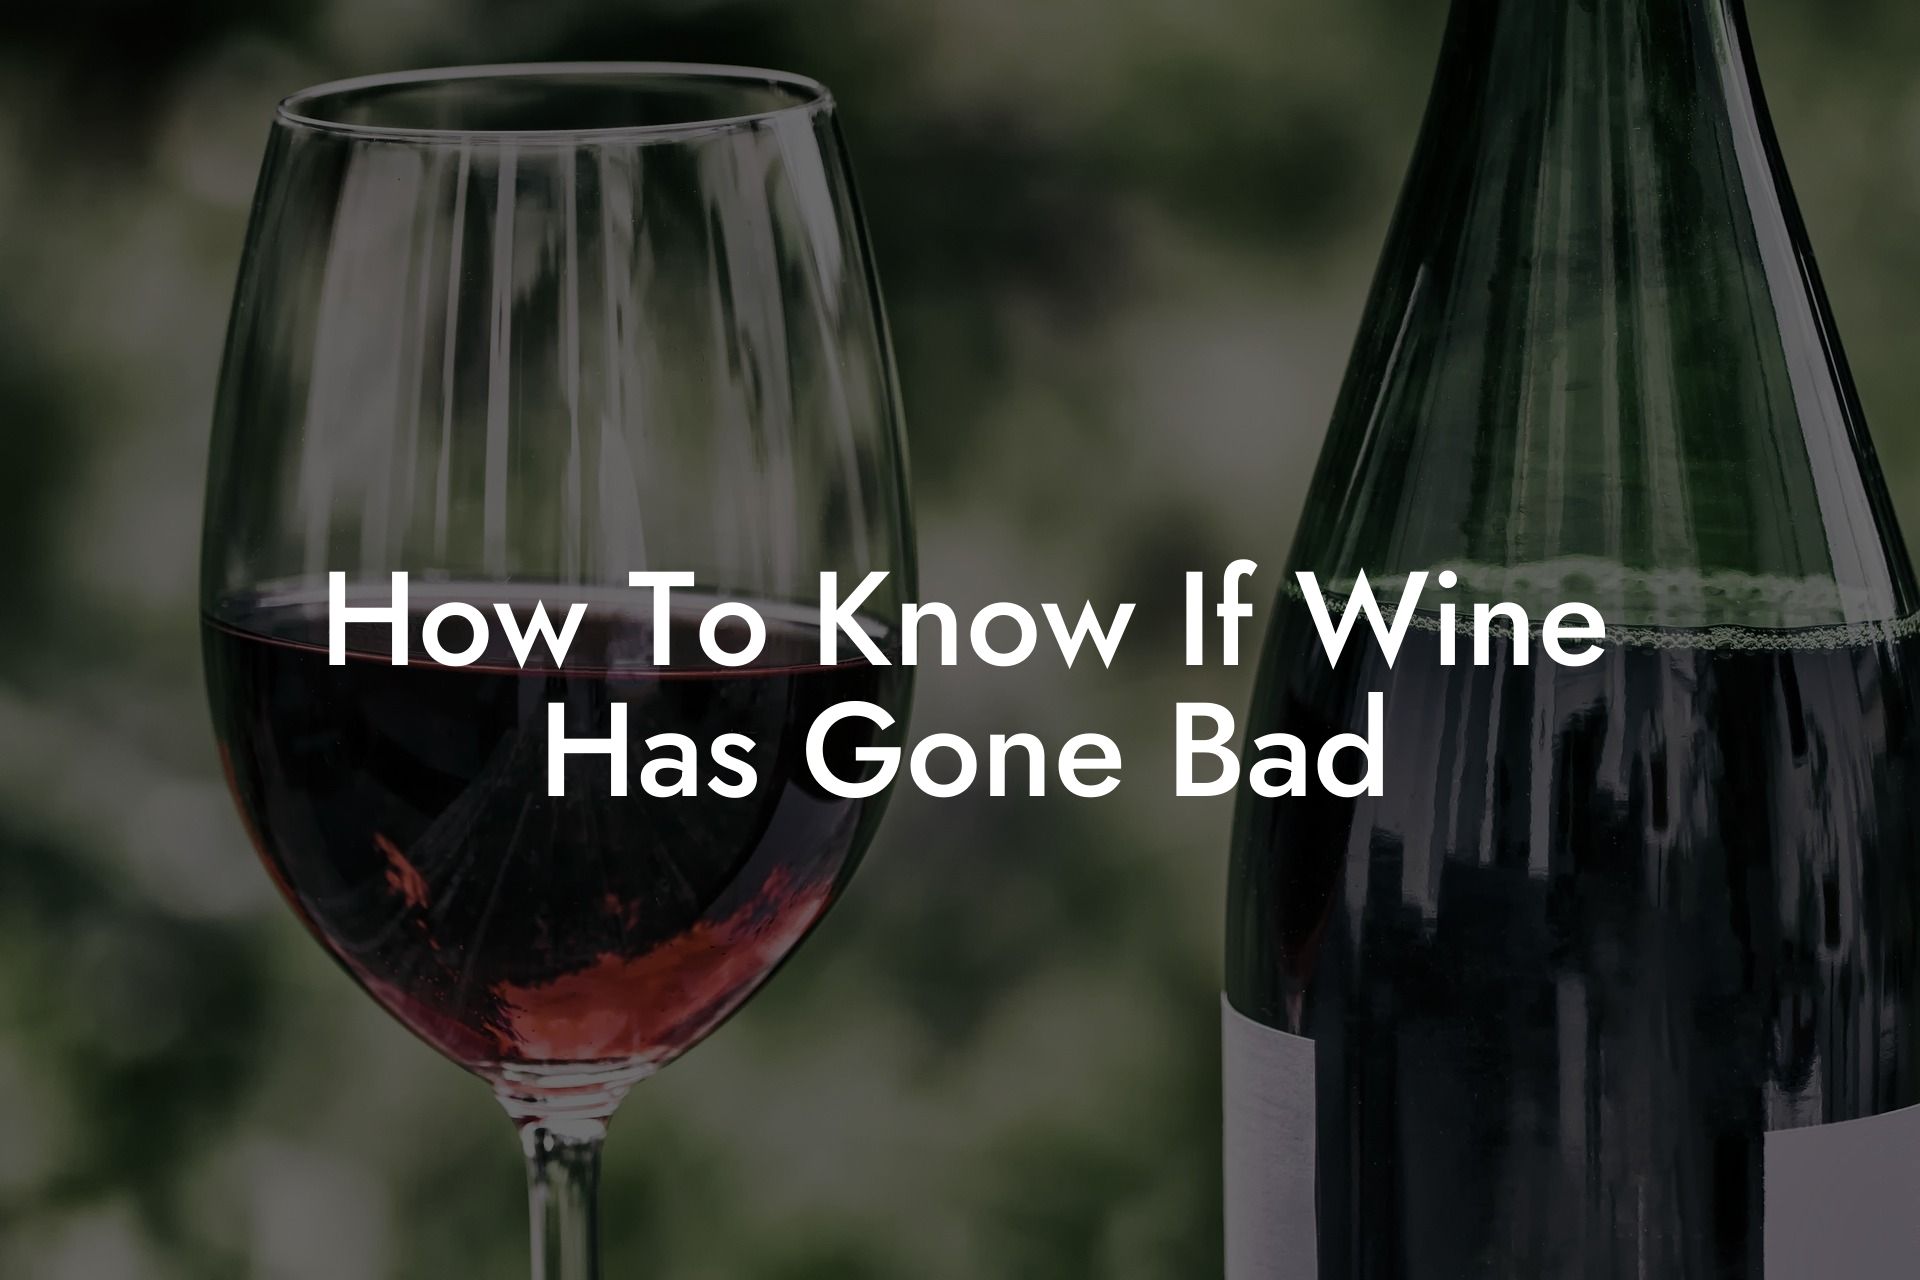 How To Know If Wine Has Gone Bad